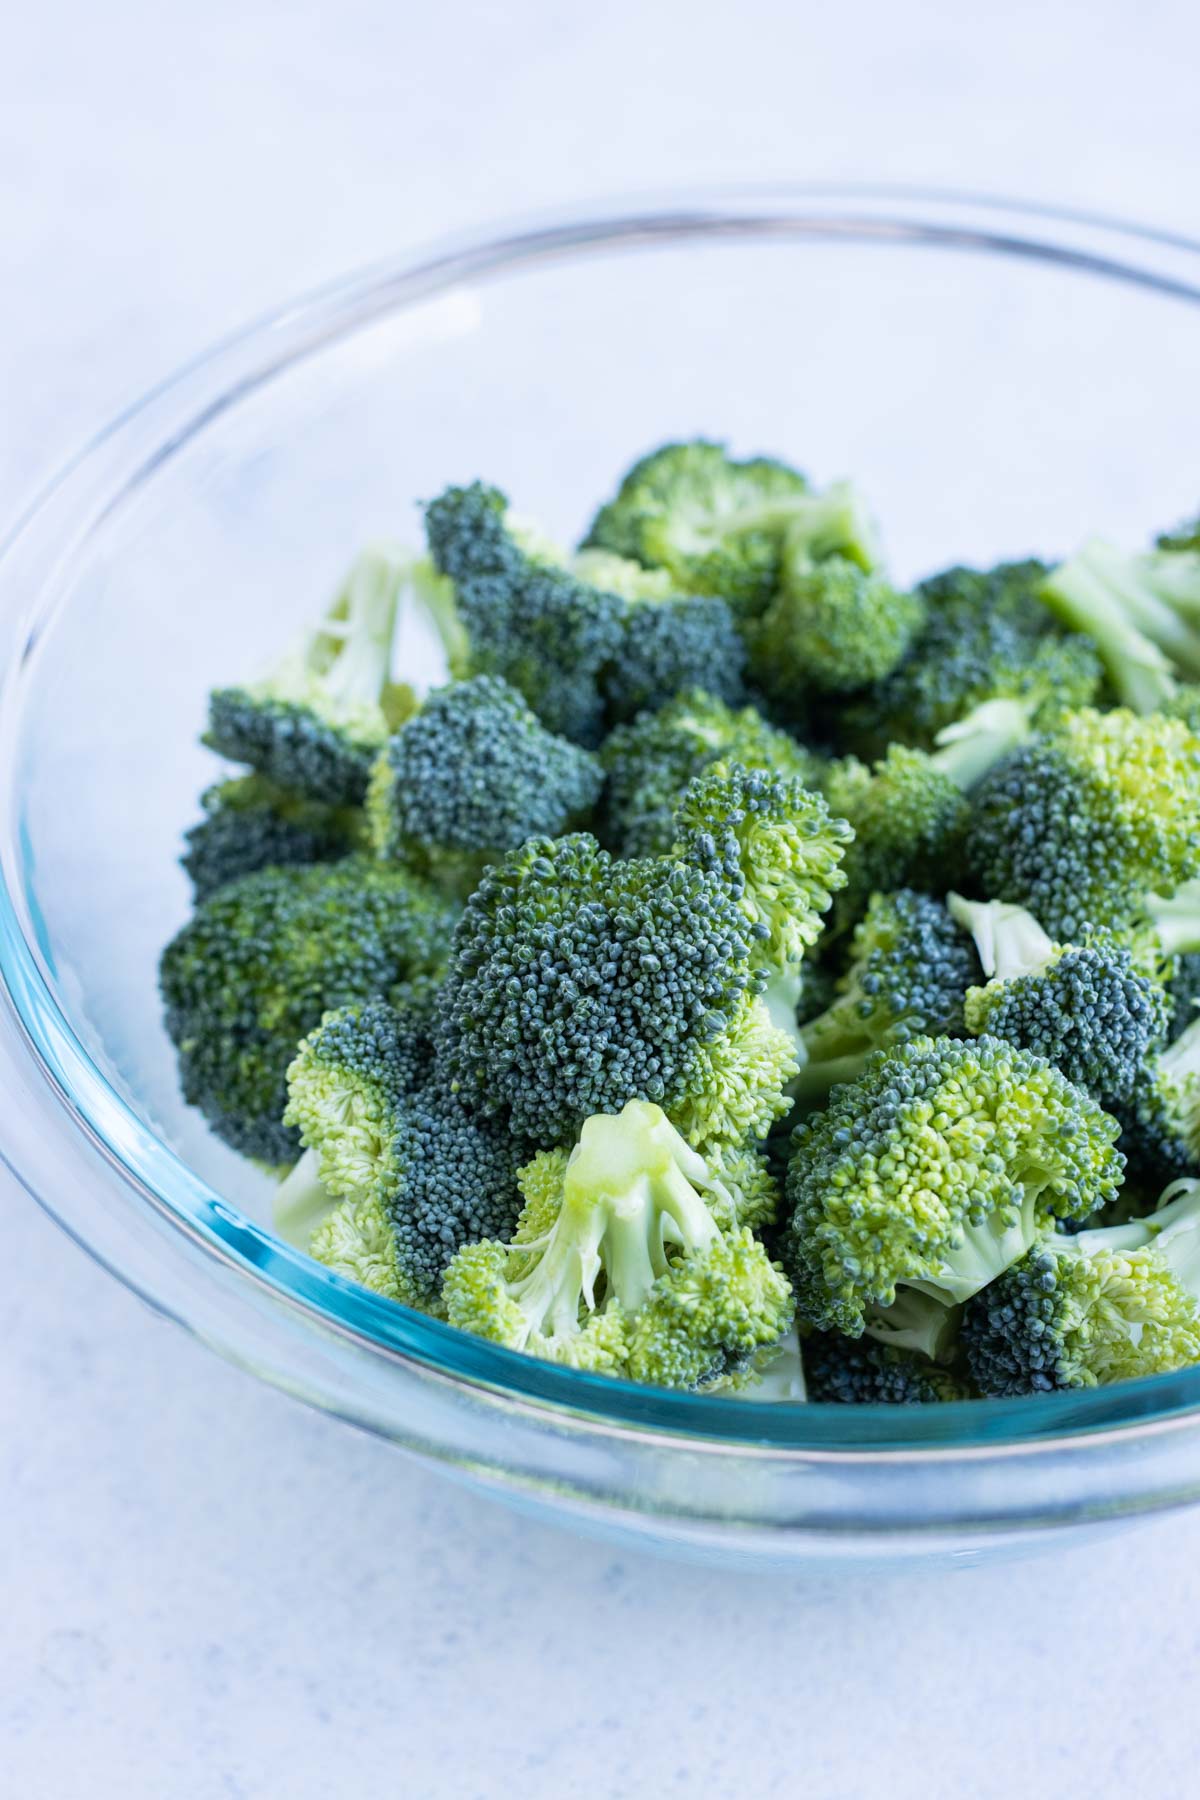 You can steam broccoli in a microwave-safe bowl.